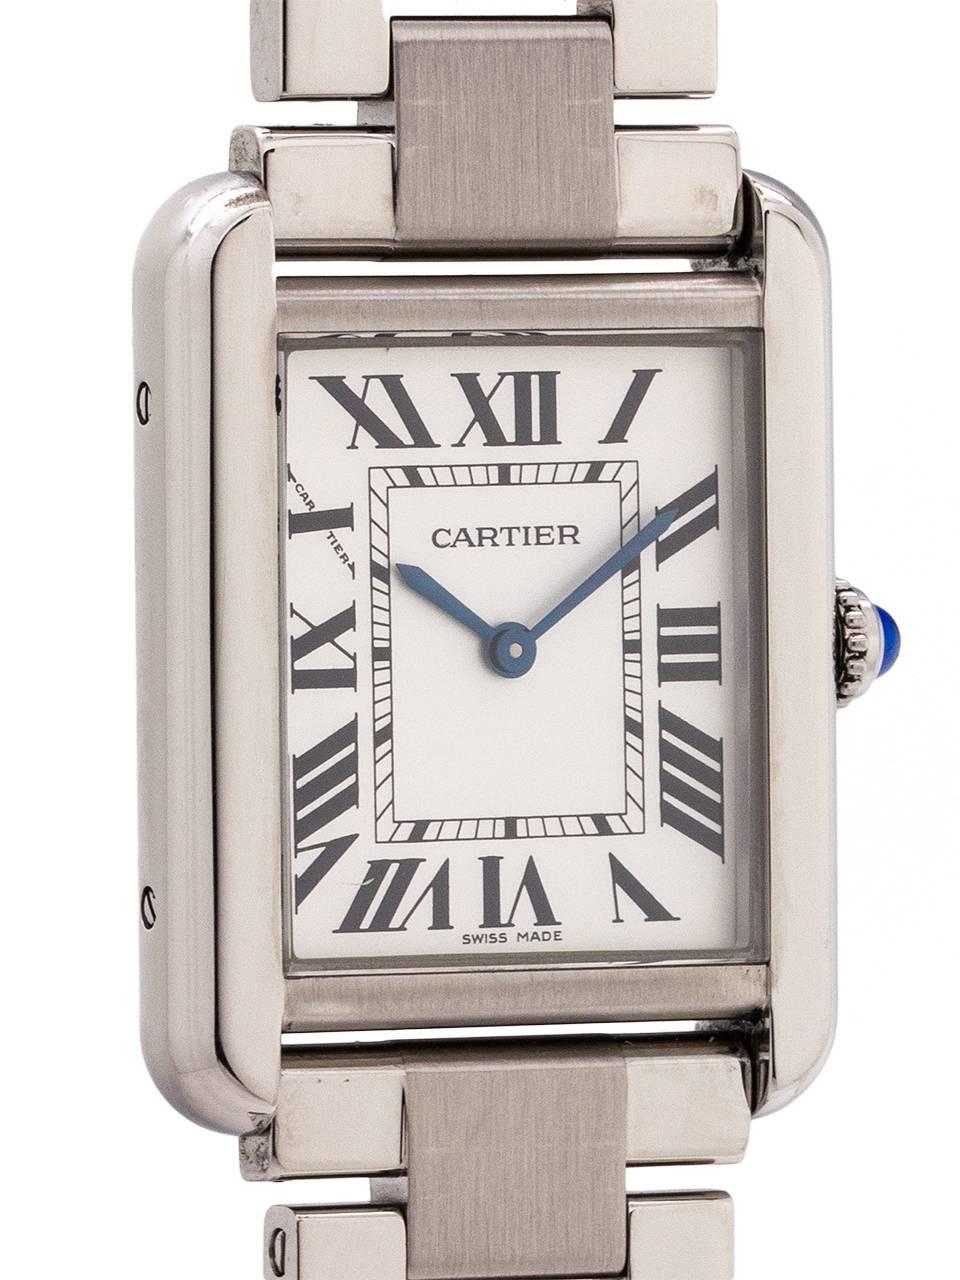 
Cartier Lady Stainless Steel Tank Solo ref 3170 with bracelet with butterfly deployment clasp. Very clean preowned example of this streamlined 25 X 31mm version of the Cartier Tank Louis. Battery powered quartz movement with cabochon sapphire